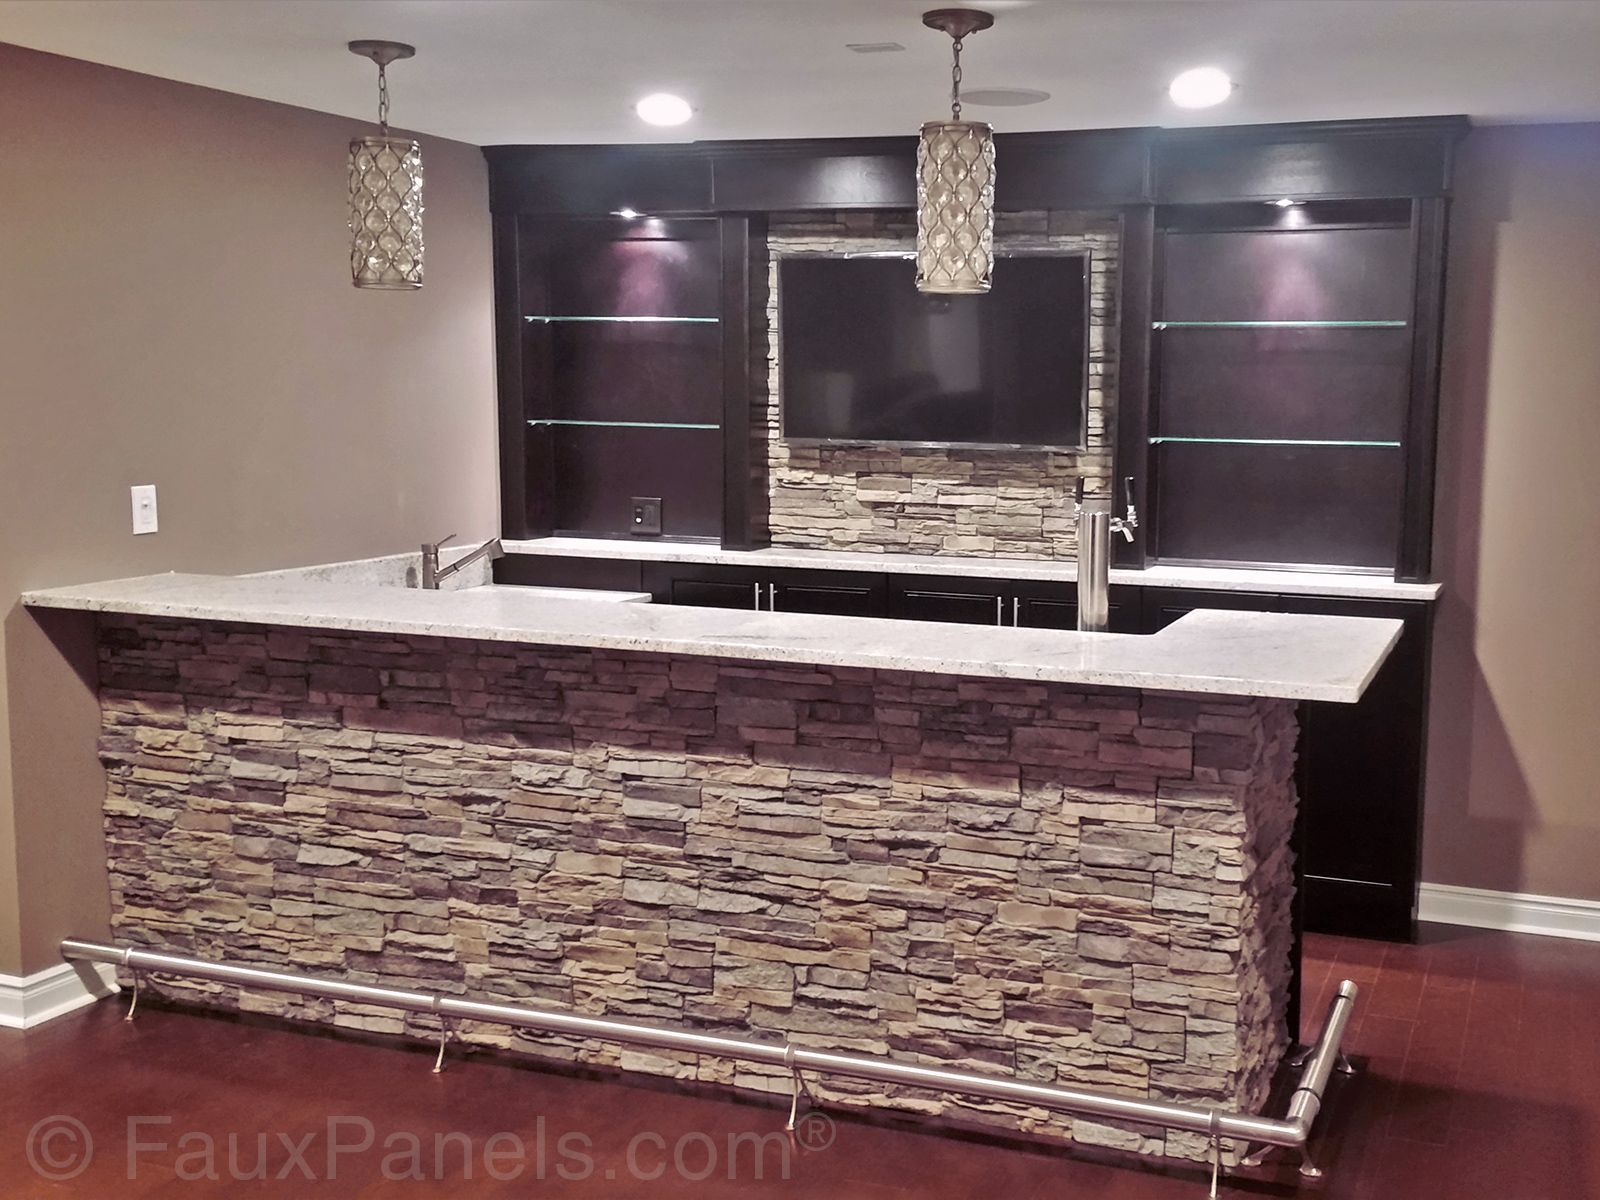 Home Bar Pictures | Design Ideas for Your Home Bar Plans